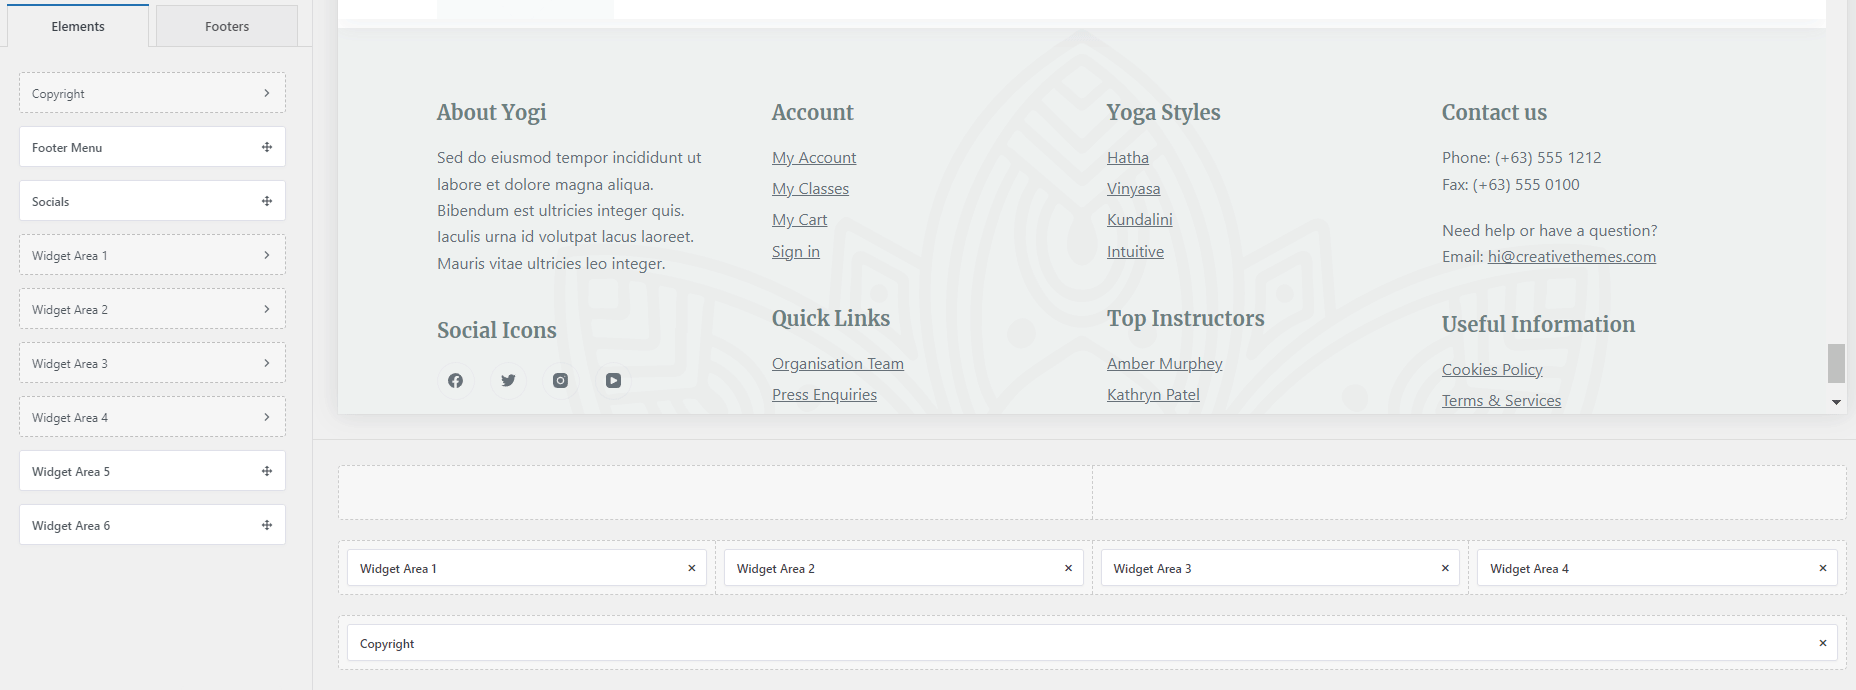 Add Or Delete An Element From The WordPress Footer